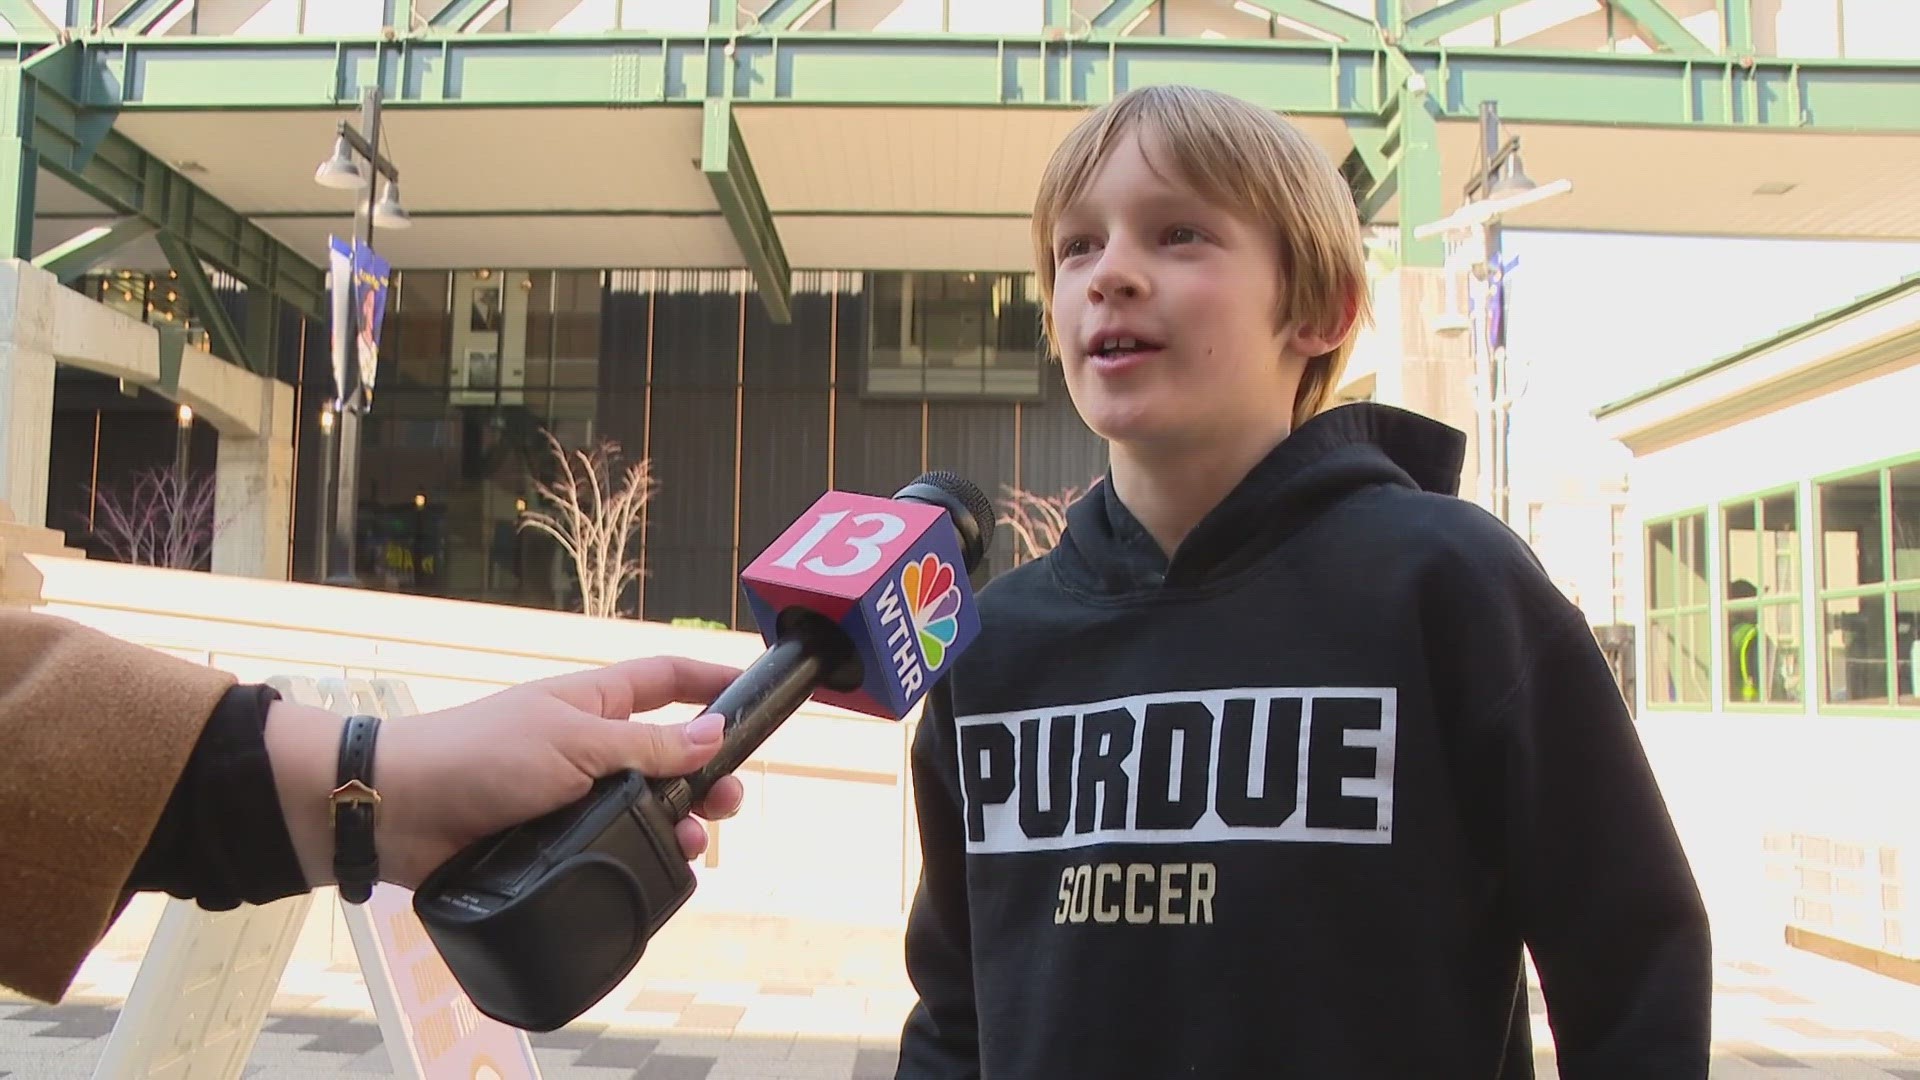 13News reporter Anna Chalker reports from outside Gainbridge Fieldhouse and talks with Purdue fans after their NCAA Tournament victory over Utah State.